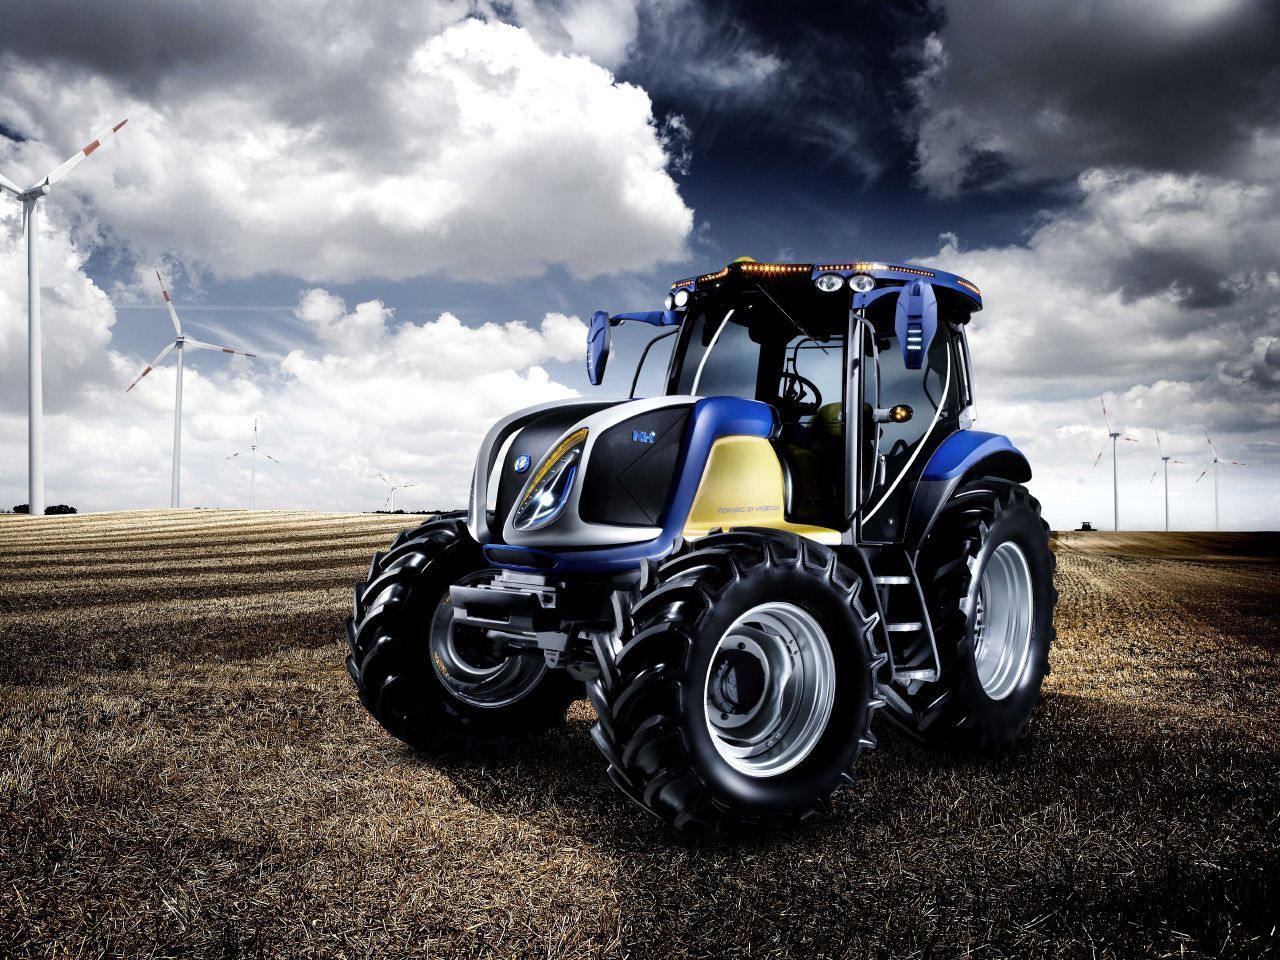 5 New Holland Tractor HD Wallpapers | Backgrounds - Wallpaper Abyss